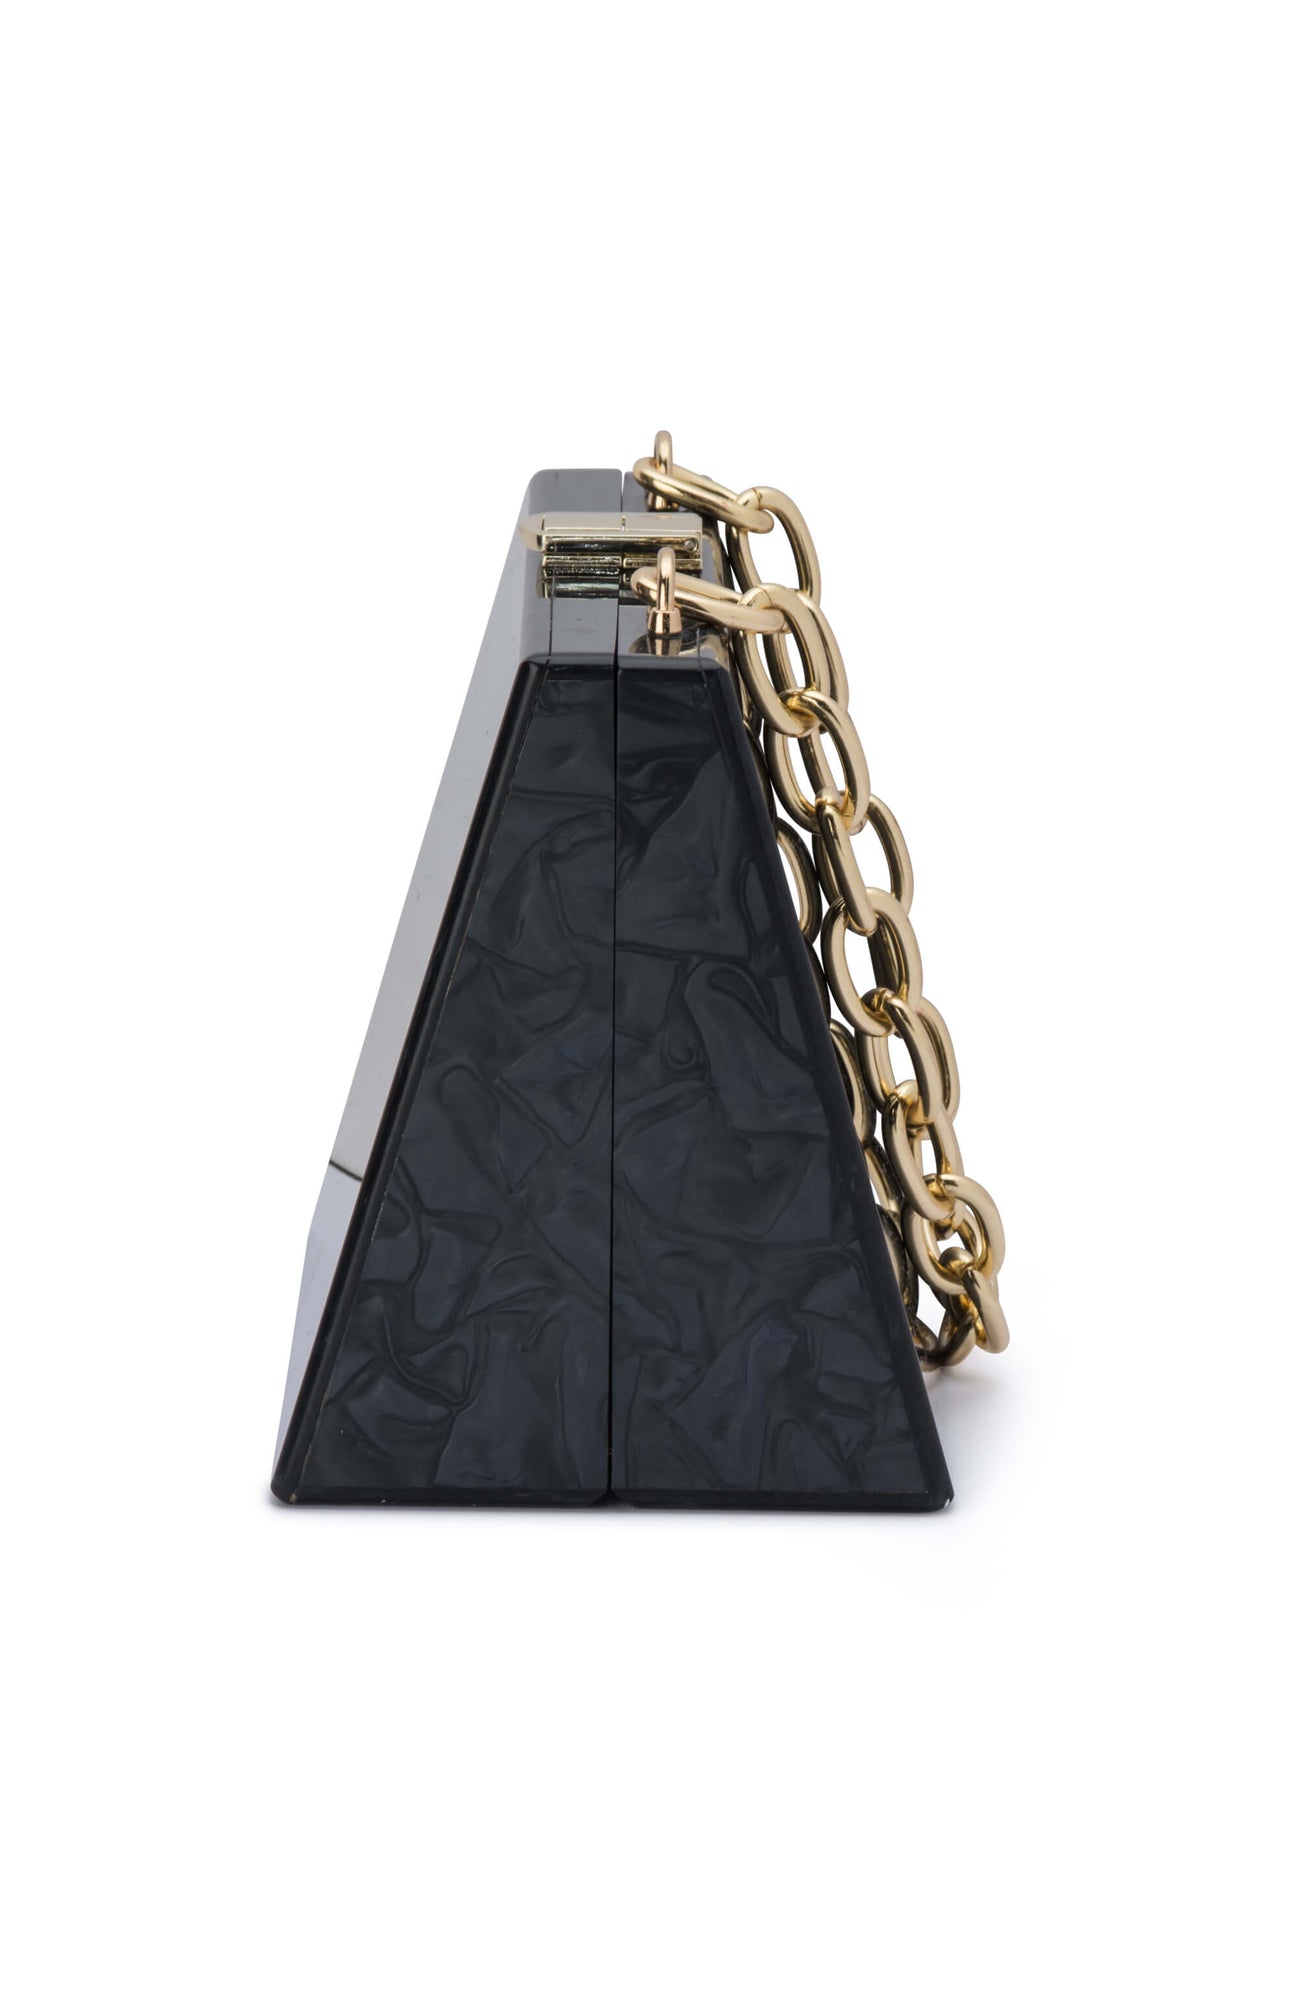 Gold Acrylic Clutch for every special occasion – Olga Berg